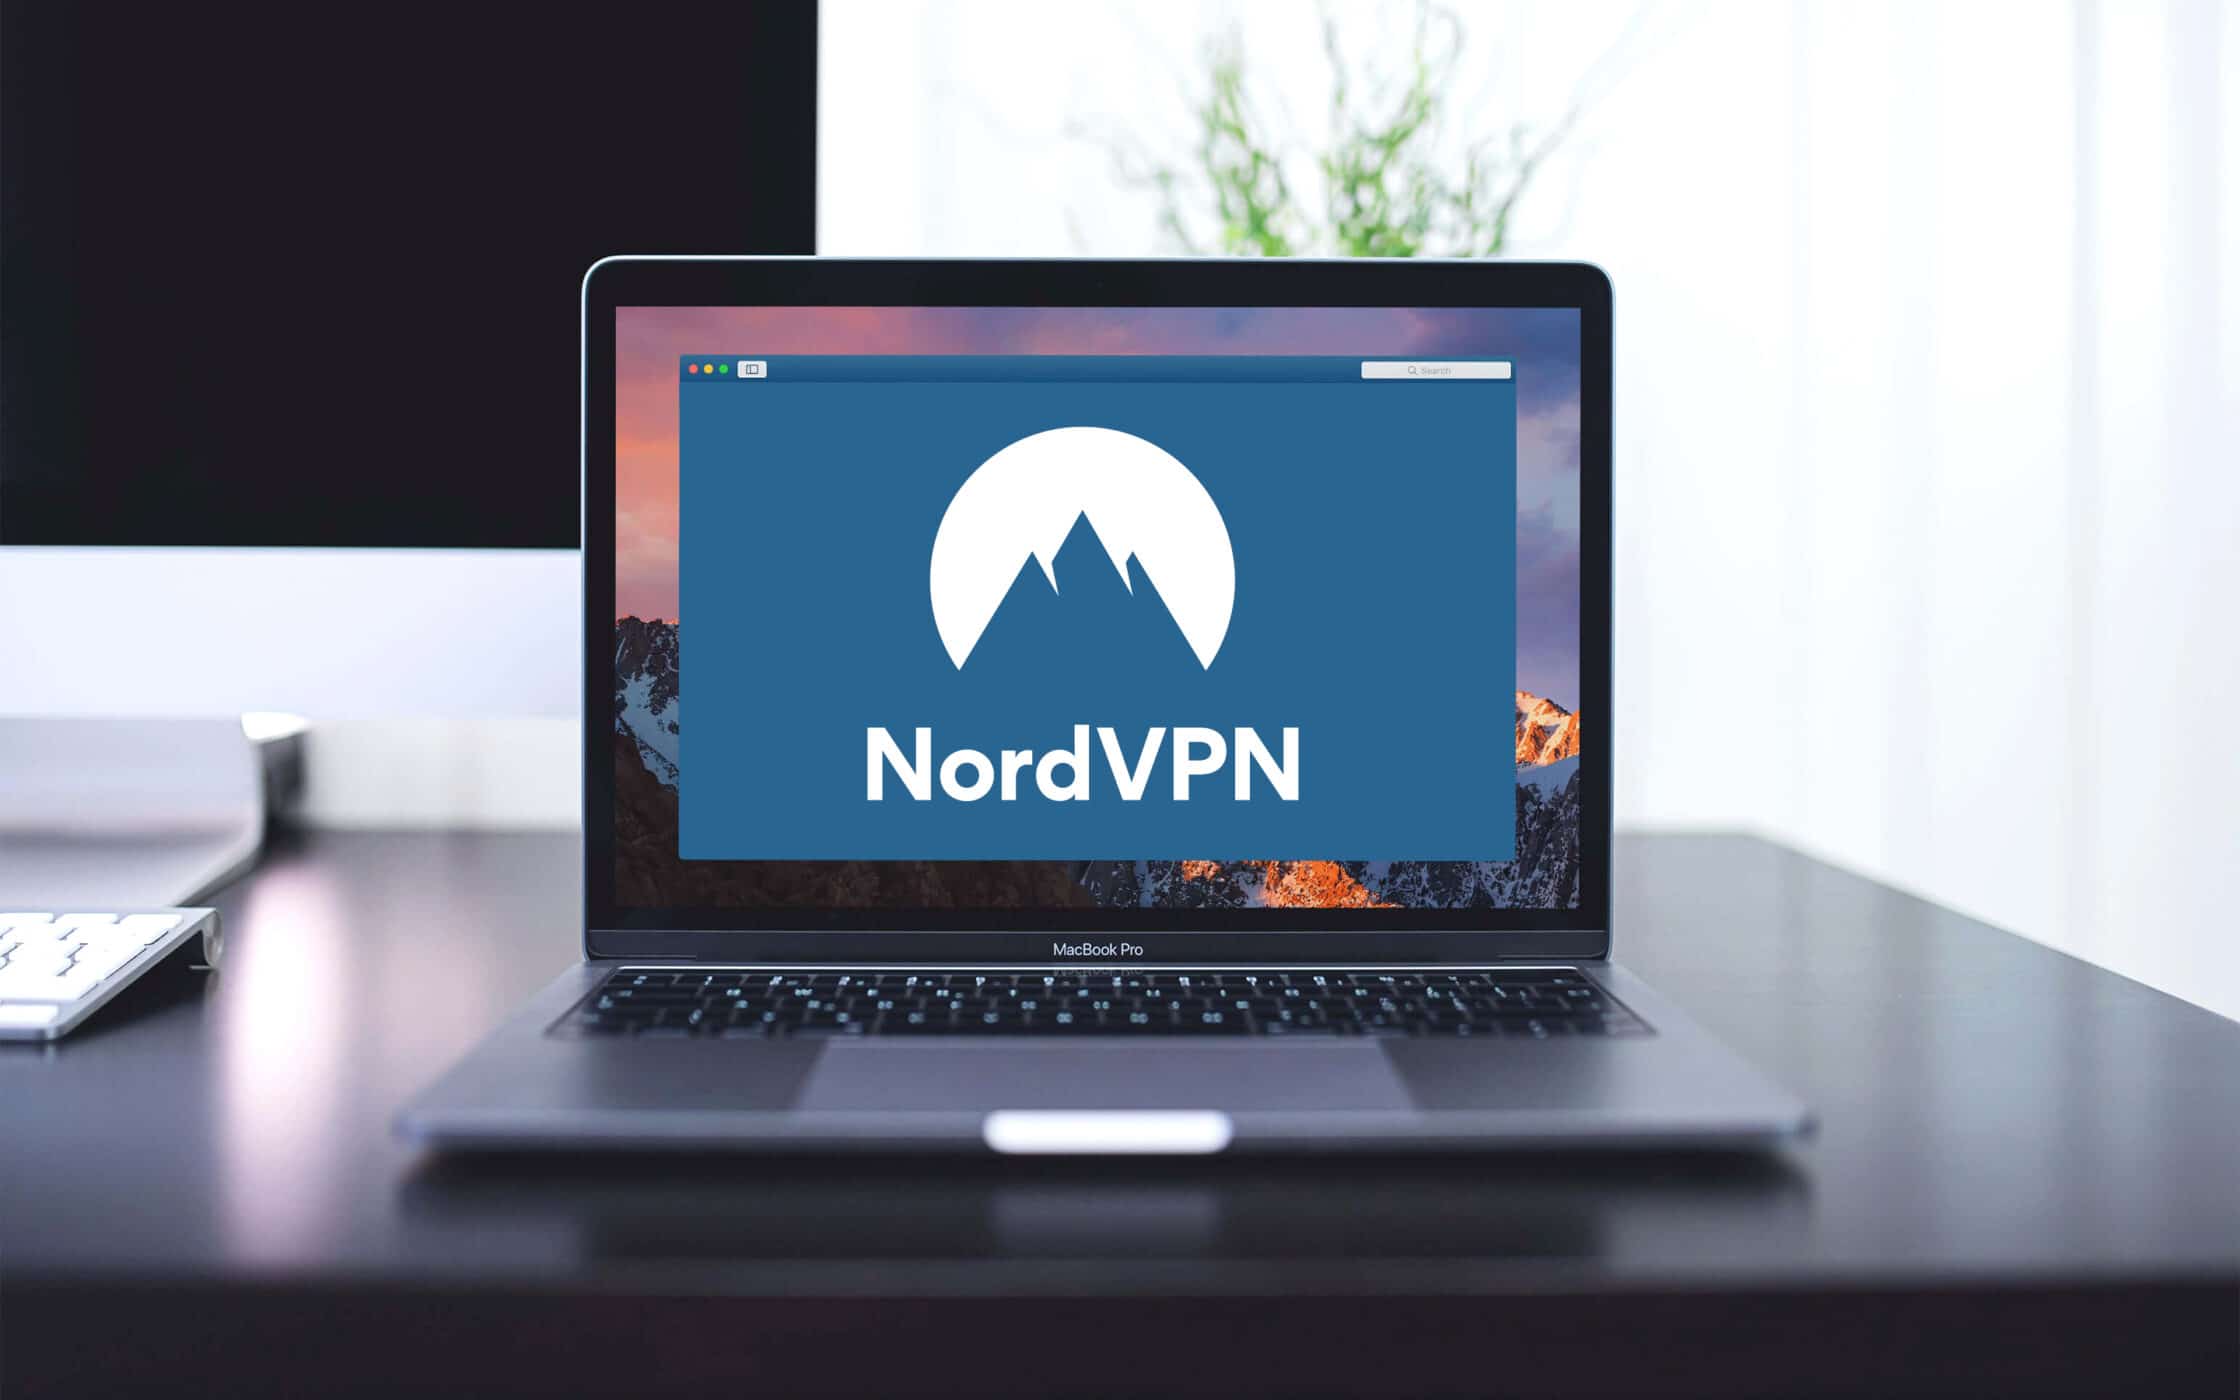 What Does This Mean for NordVPN Users?